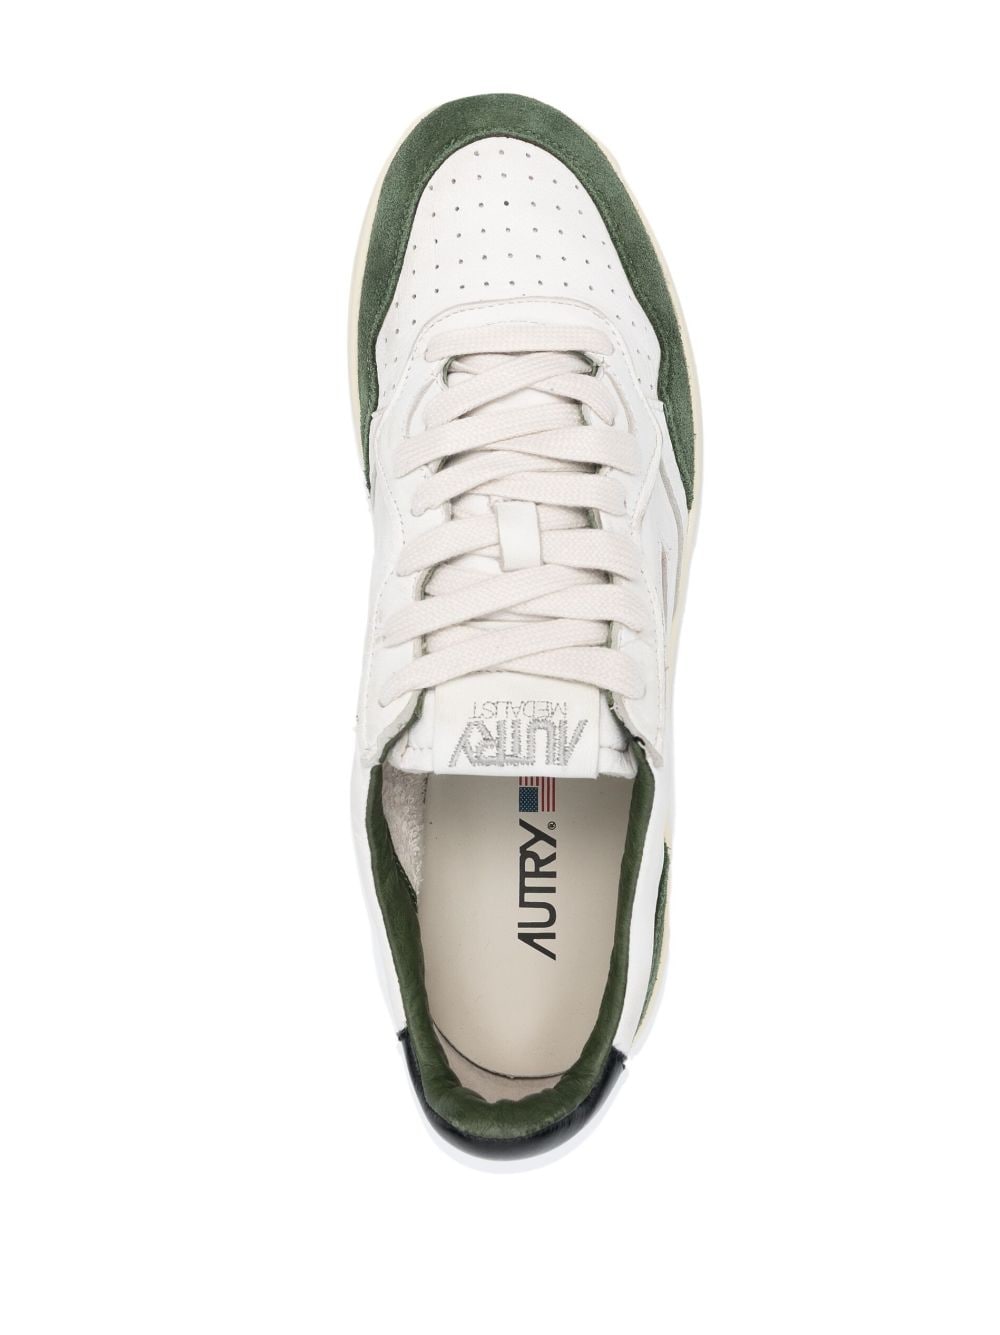 white and green medalist sneaker